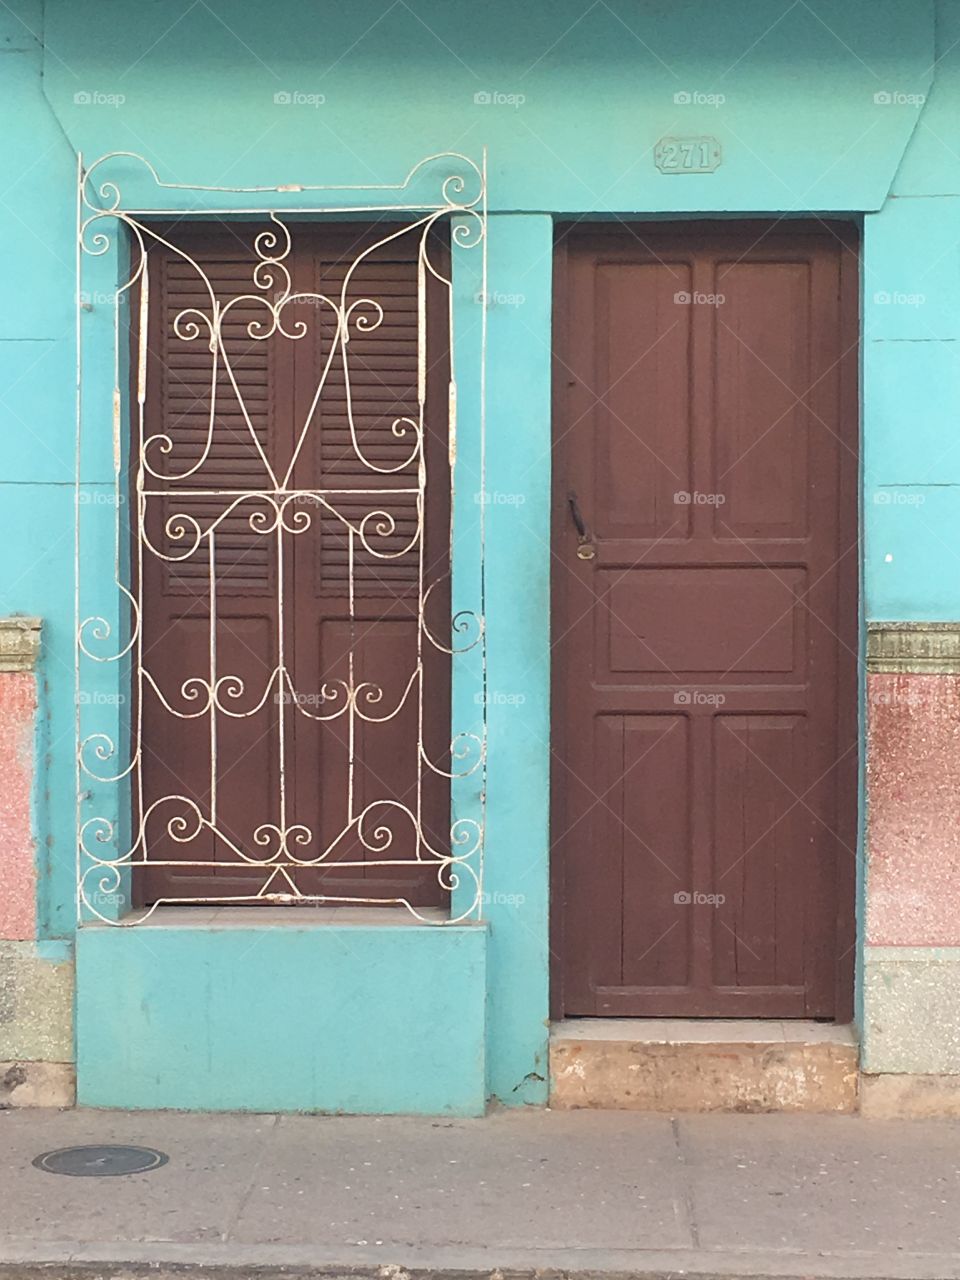 One of the many colorful doorway facades in the quiet little of Trinidad, Cuba!